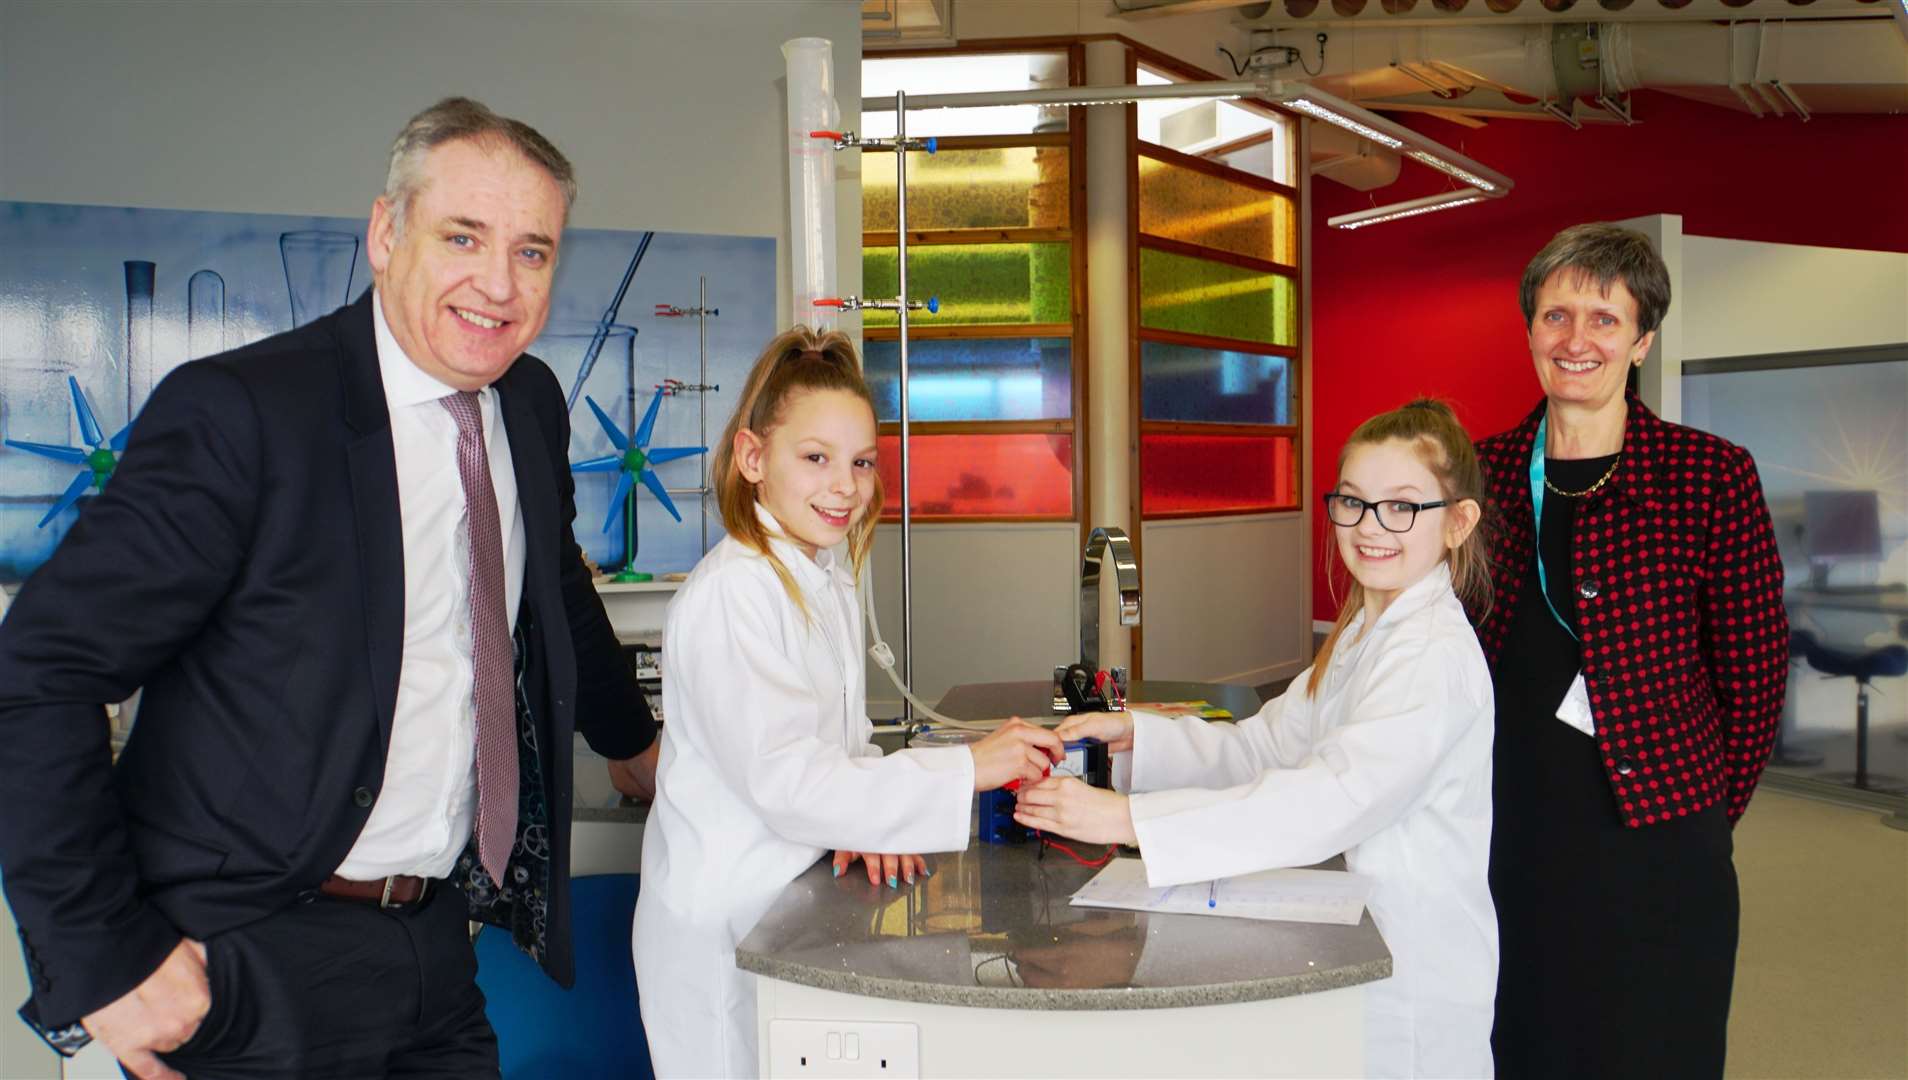 Richard Lochhead MSP declared the Newton Room open. He is pictured with Carroll Buxton from Highlands and Islands Enterprise and budding young scientists Alisha Cooper (second left) and Kaitlyn Manson.